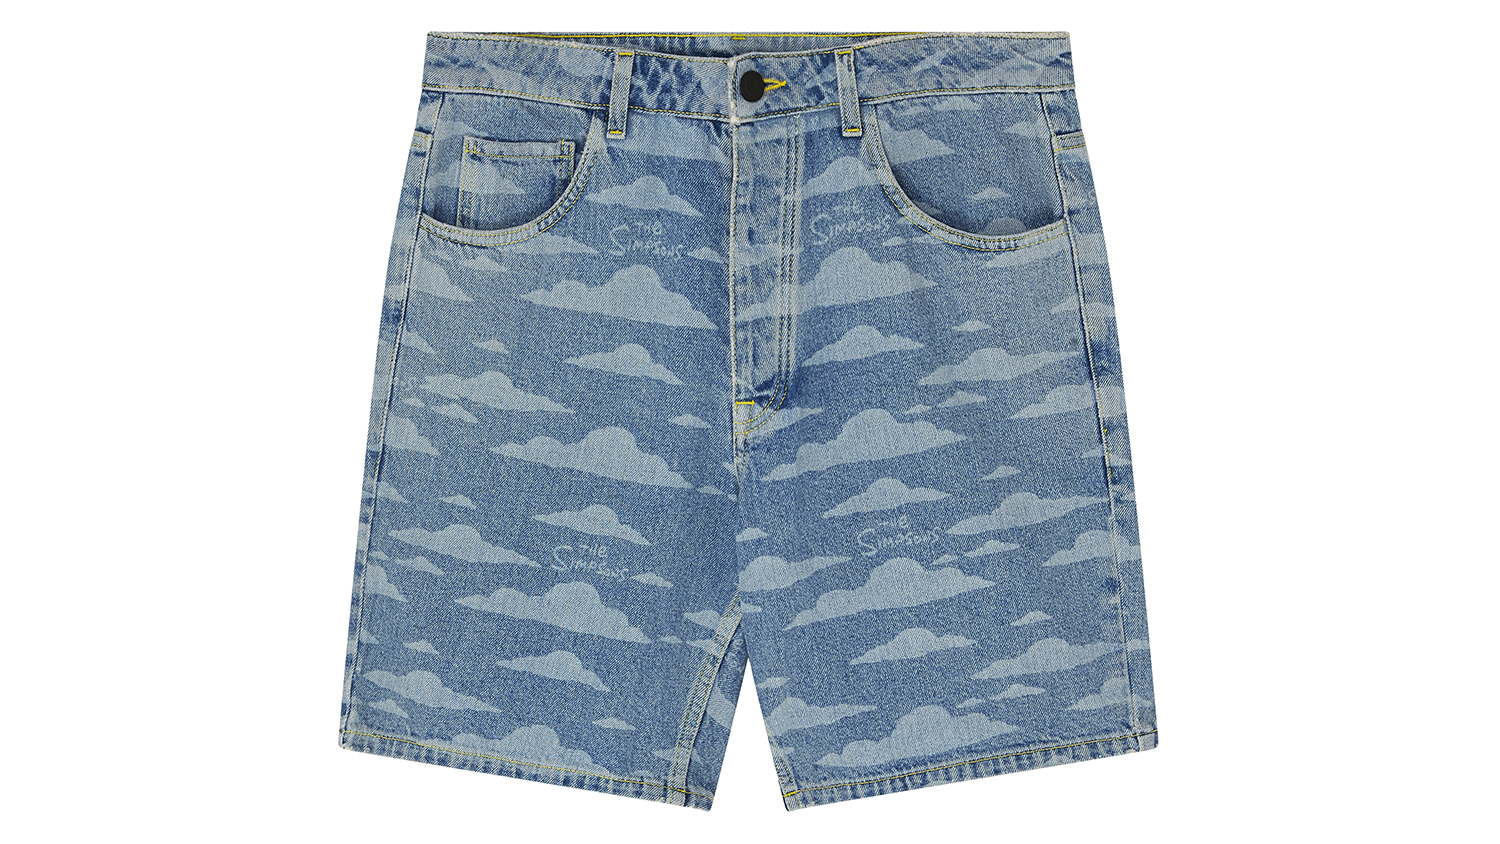 asos x the simpsons collection bluecloudshorts